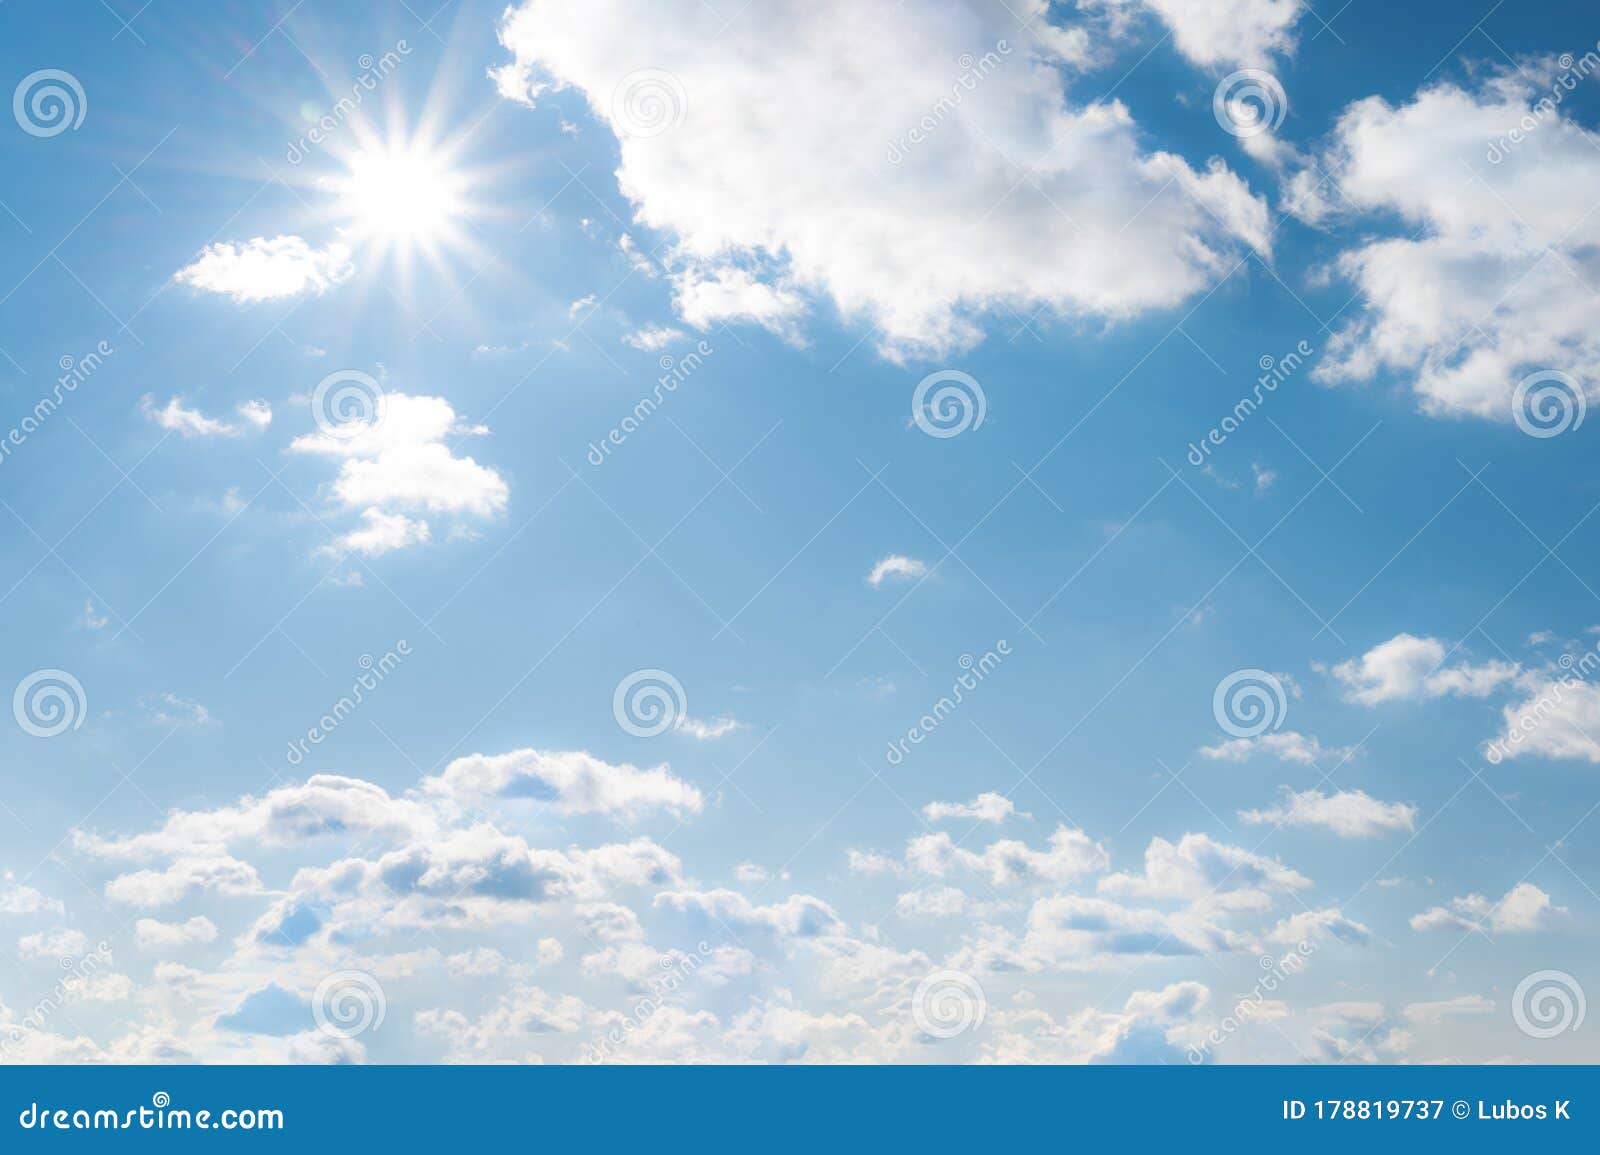 sun with sunrays on the blue sky with white clouds. daytime and good weather